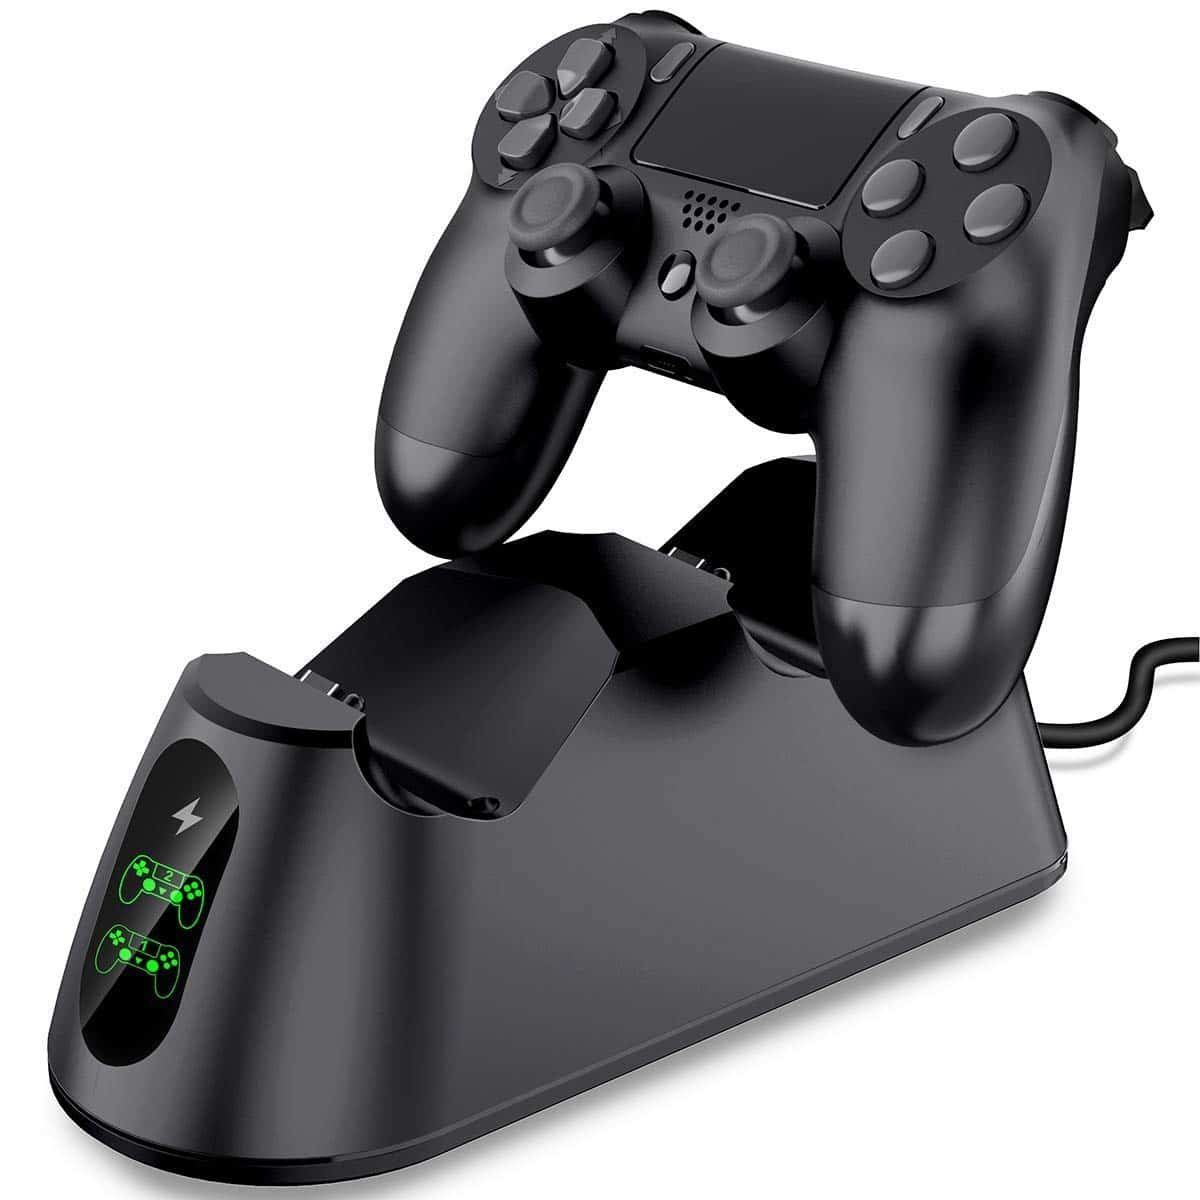 Top 5 Best PS4 Controller Chargers in 2020 Review